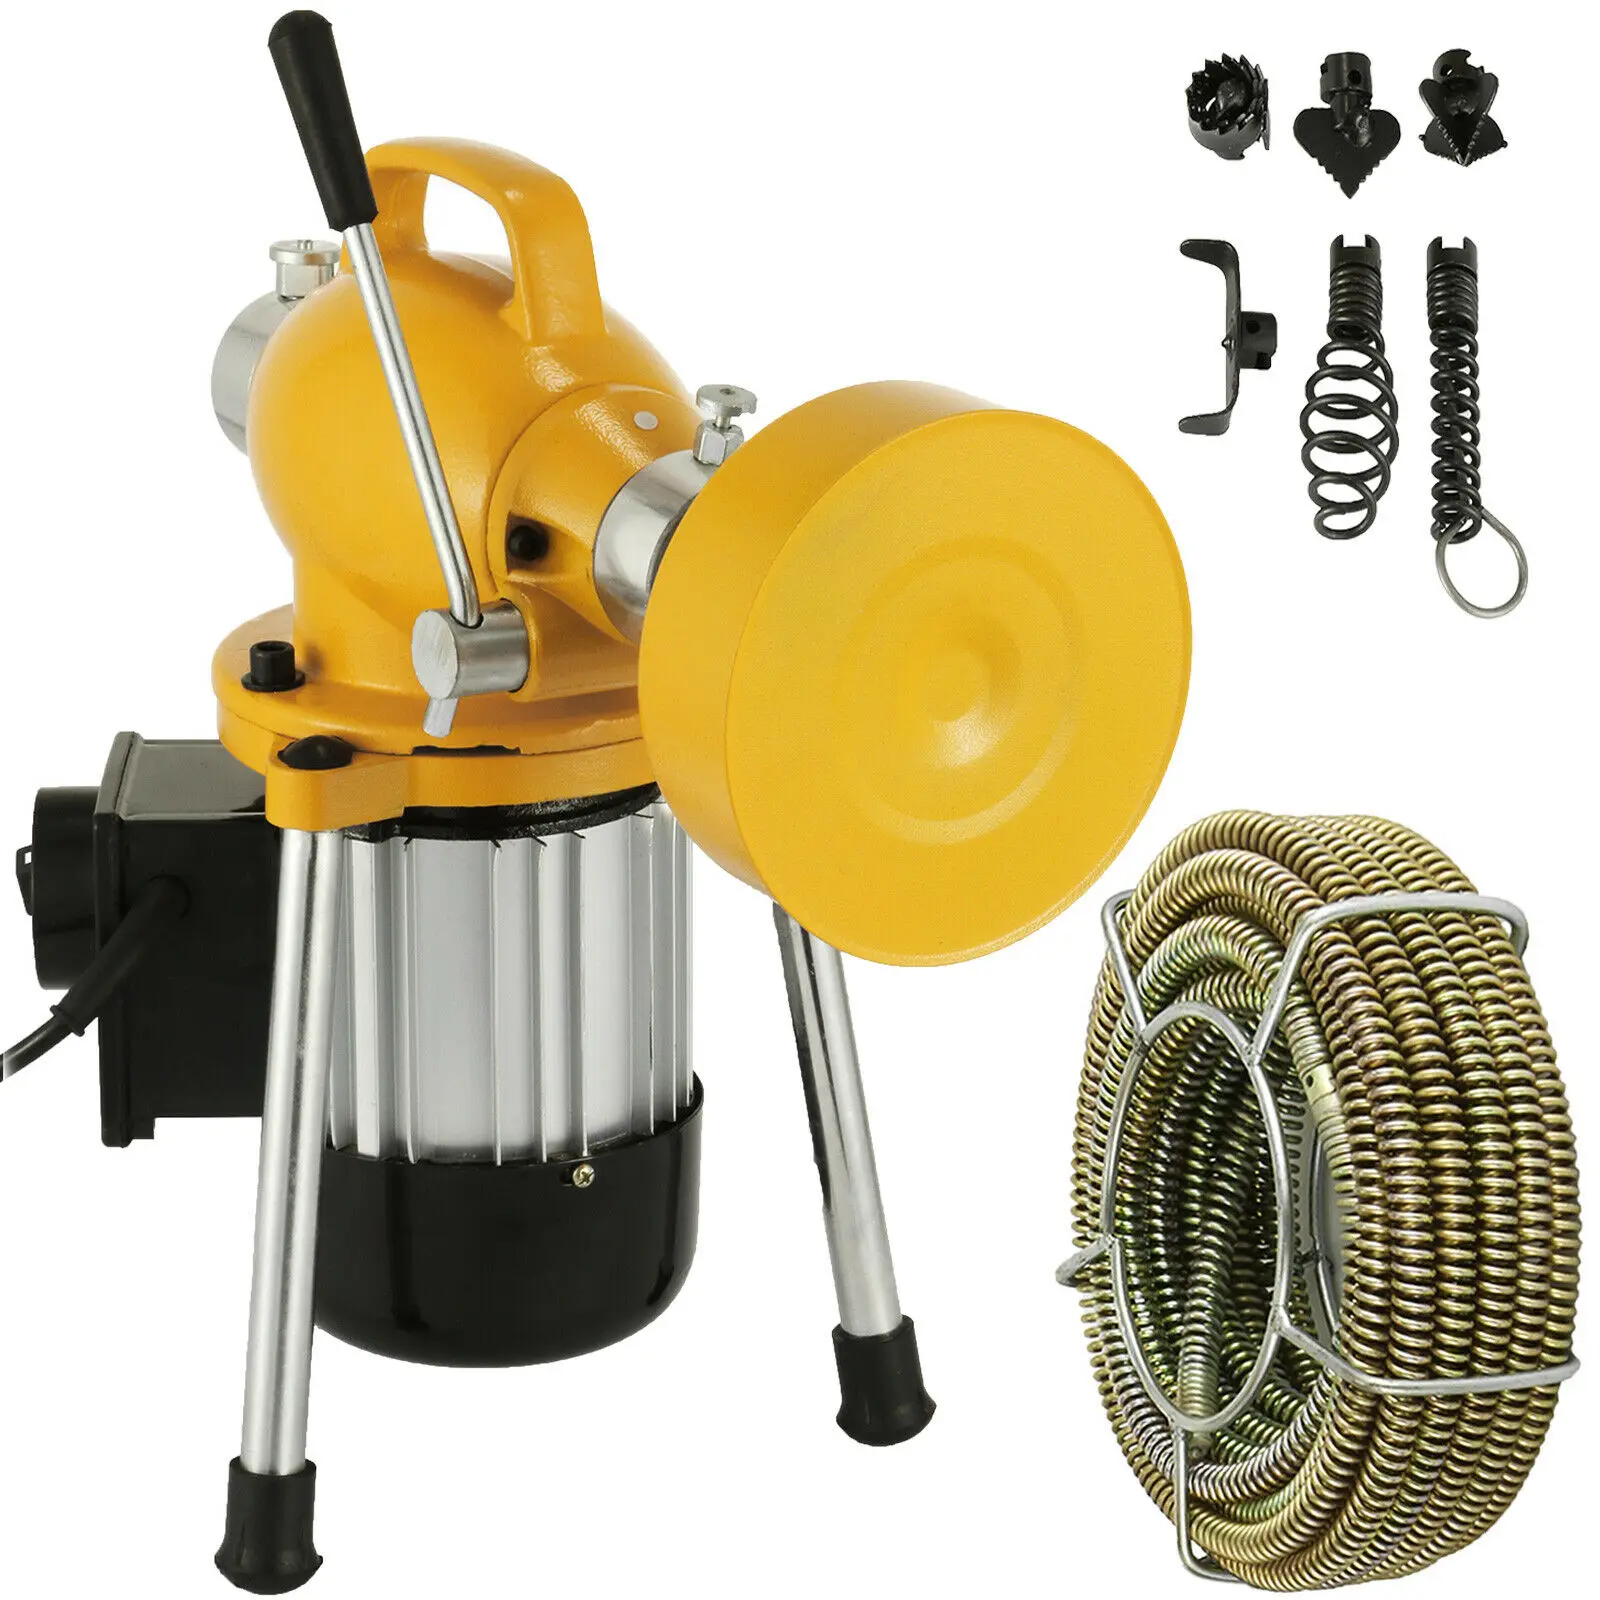 Ø20-100mm​ Sectional Drain Cleaner 400W Pipe Sewer Cleaning Machine w/ Cutters 